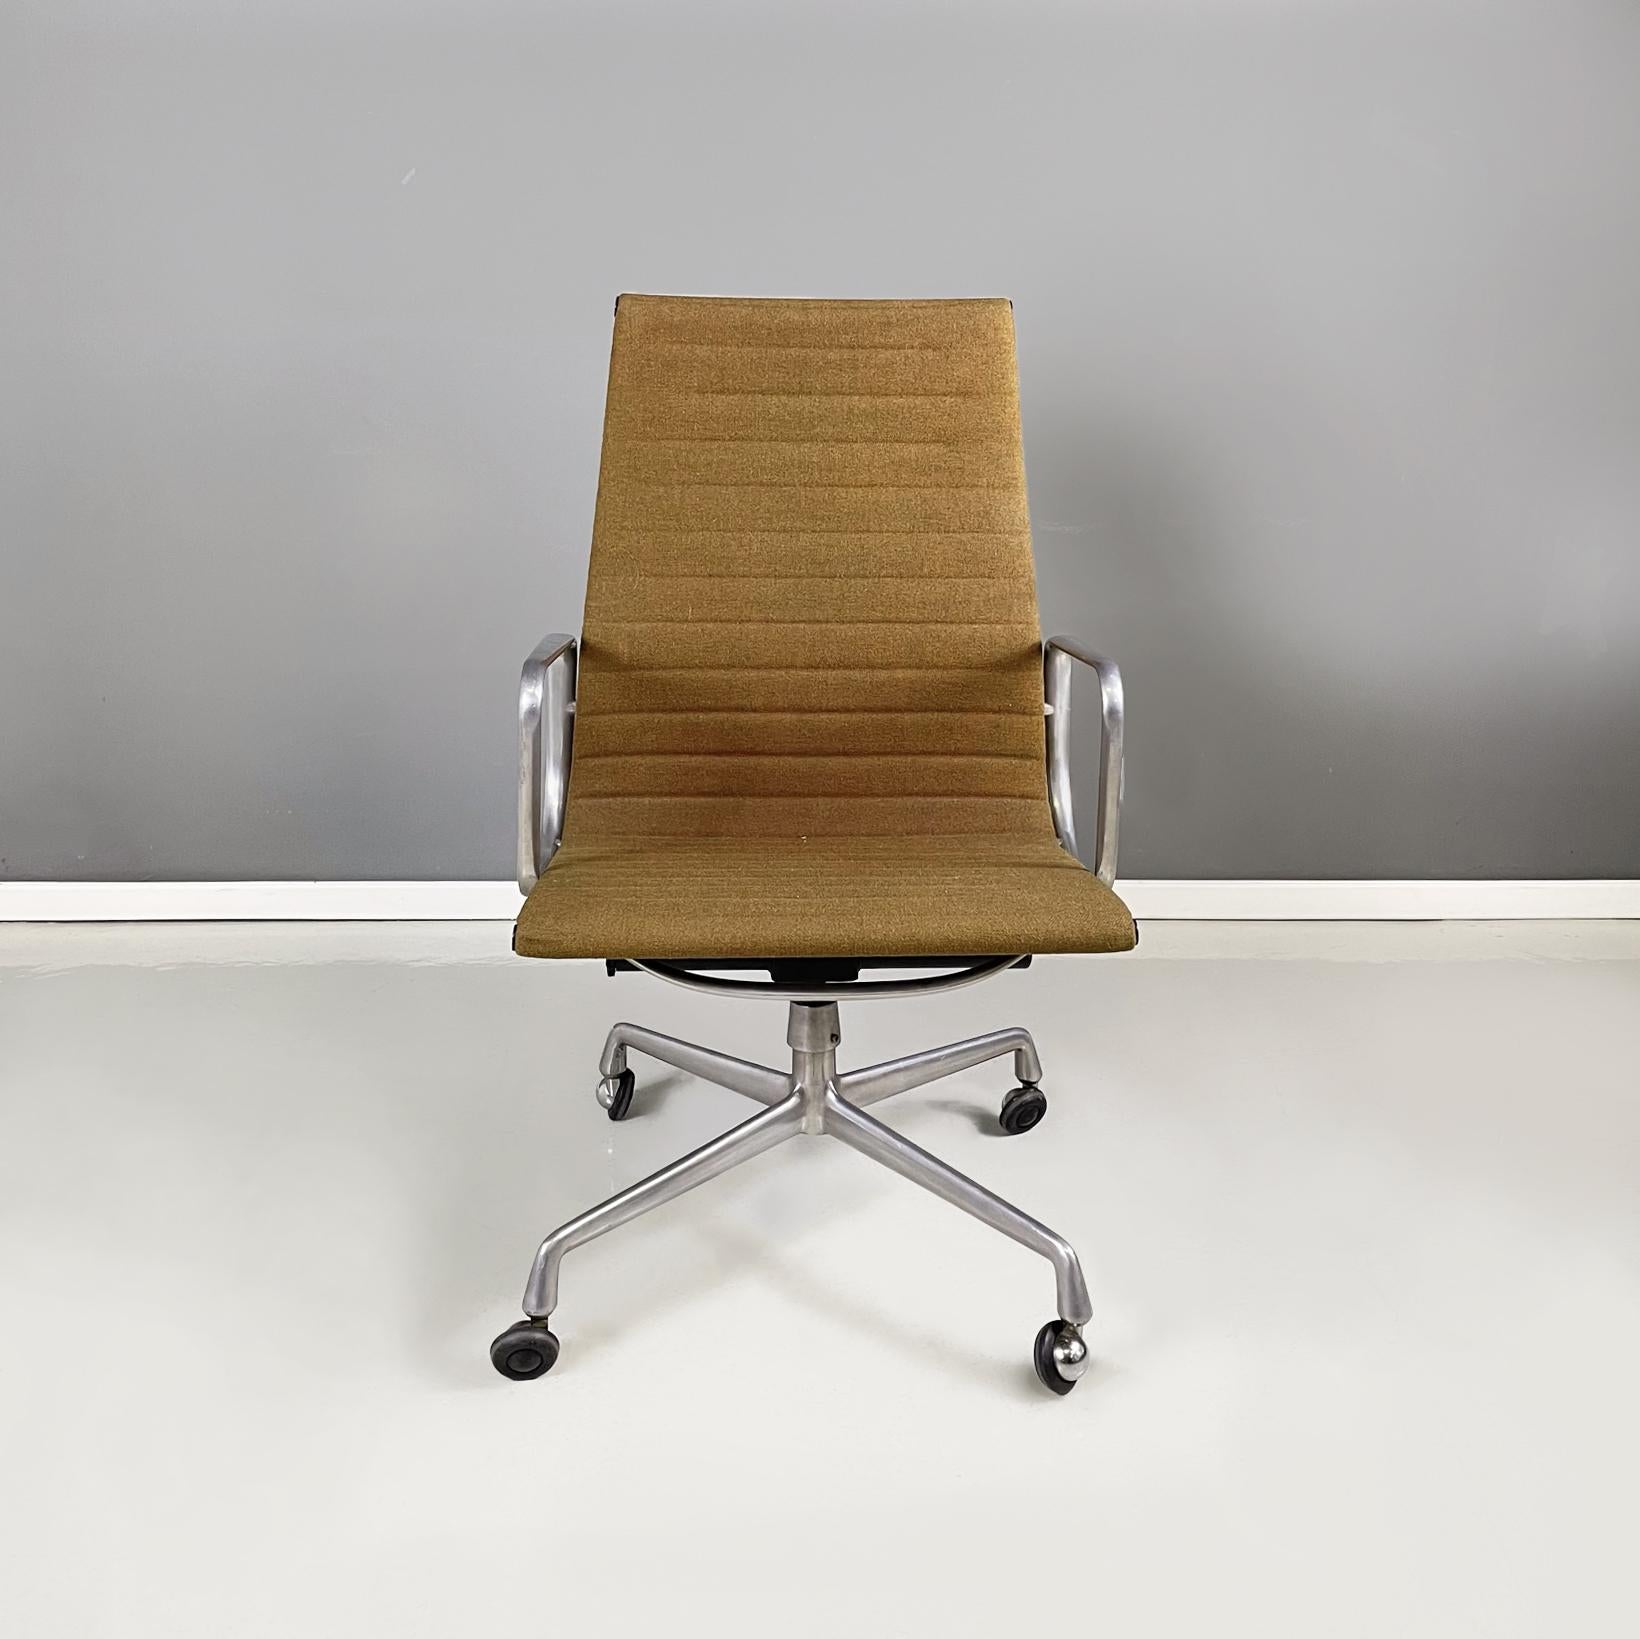 Italy mid-century Office chair EA 119 Aluminum Group by Eames for ICF, 1960s
Office chair mod. EA 119, belonging to Aluminum Group, with aluminum structure. Seat and backrest lightly padded and upholstered in green-brown fabric. Square armrests.